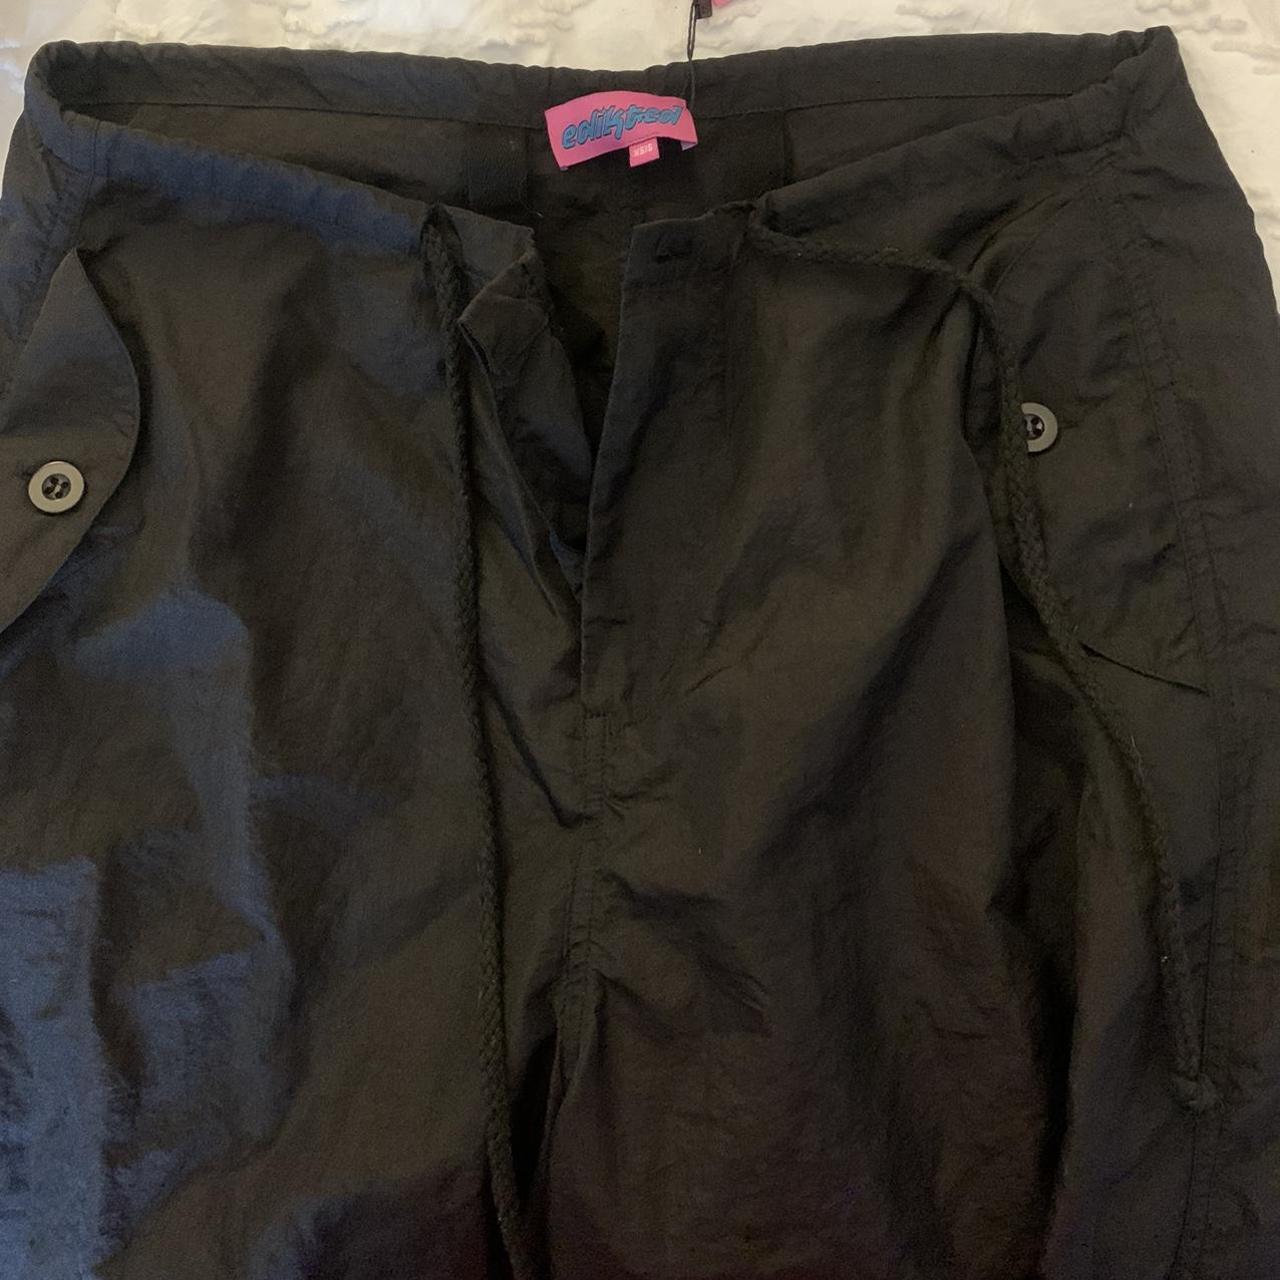 Edikted rian nylon cargo pants new with tags never... - Depop